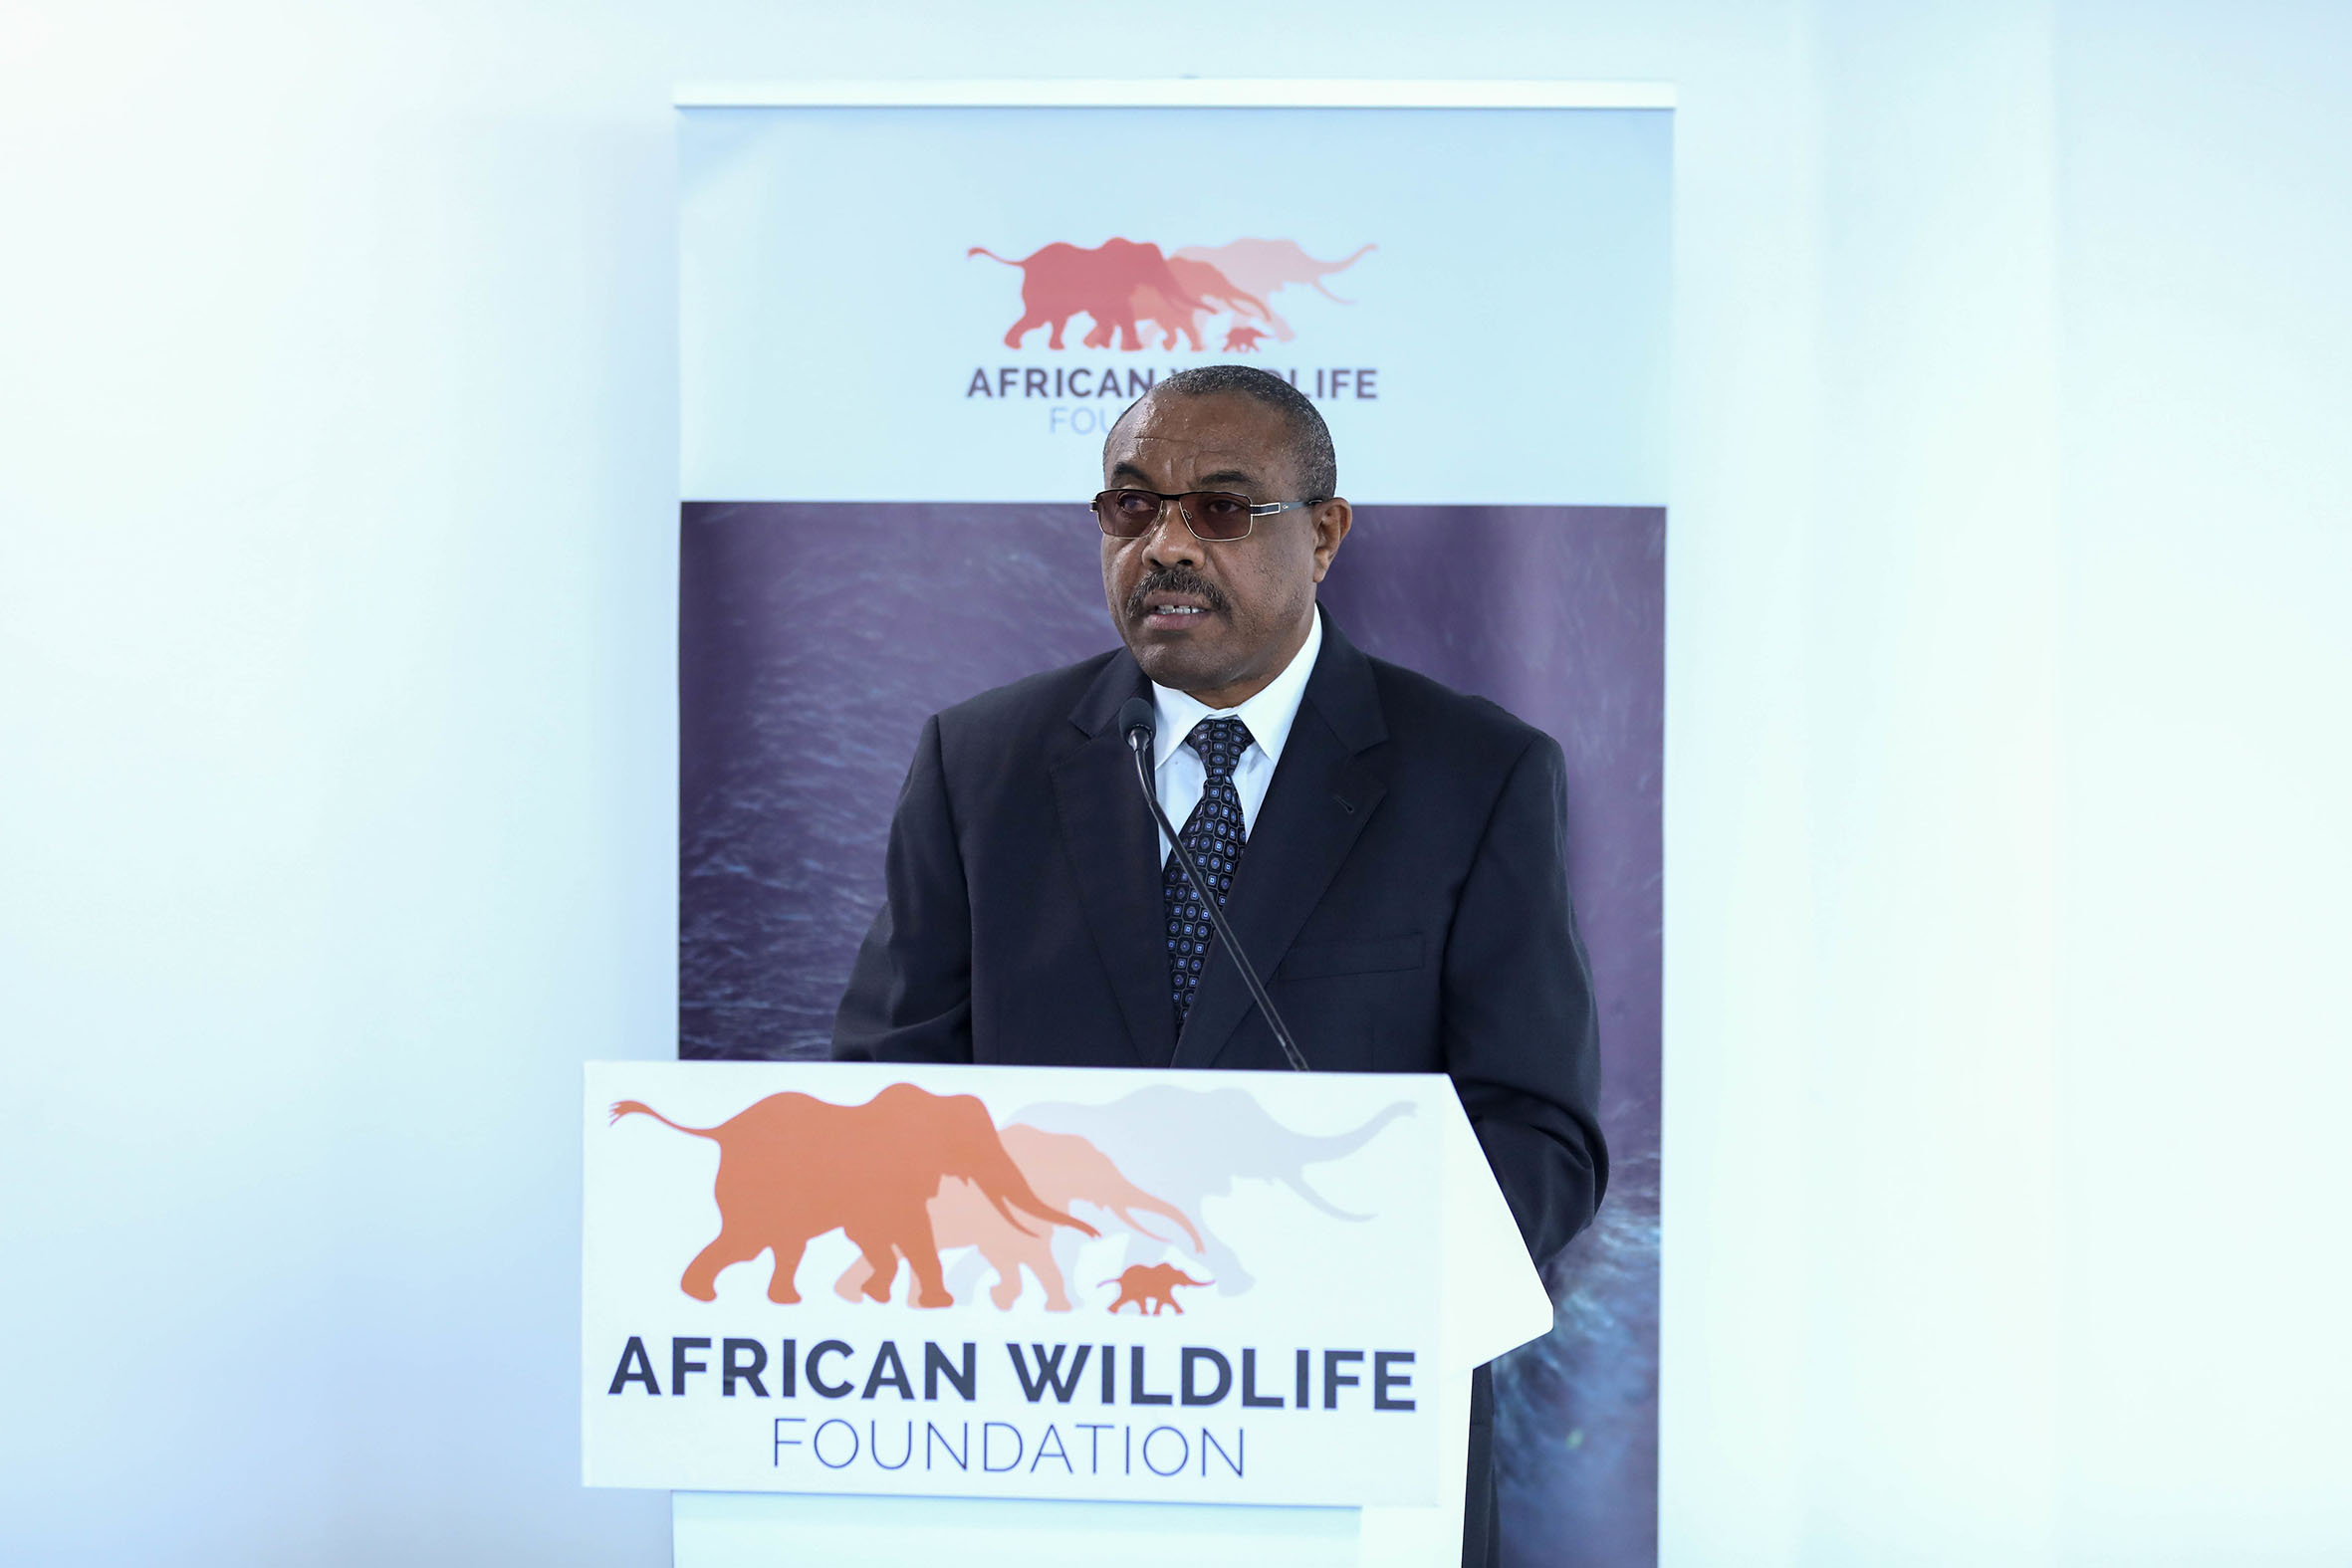 Former Ethiopian Prime Minister Hailemariam Desalegn delivers remarks at the official launch of the Rwandan office of African Wildlife Foundation, in Kigali on July 18. Photo: Dan Nsengiyumva.